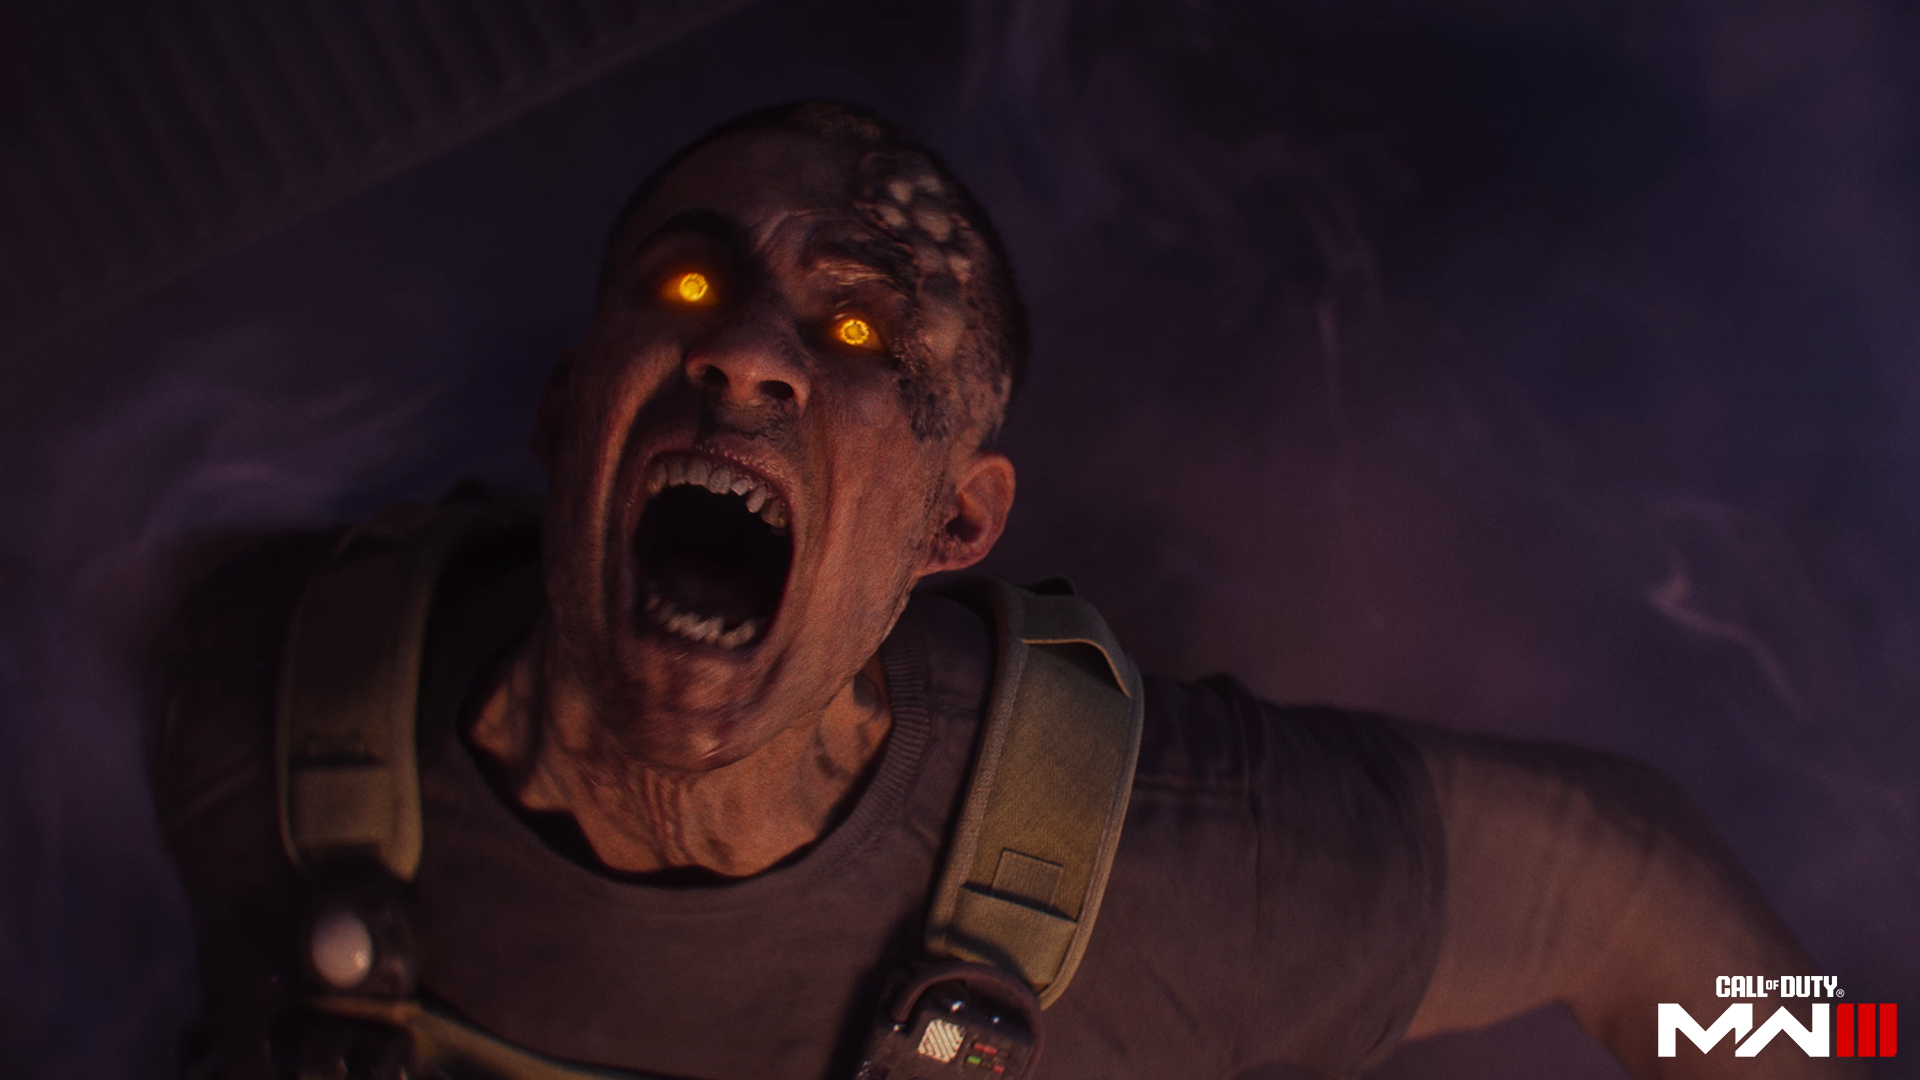 Treyarch will develop the Zombies Mode for Call of Duty: Vanguard